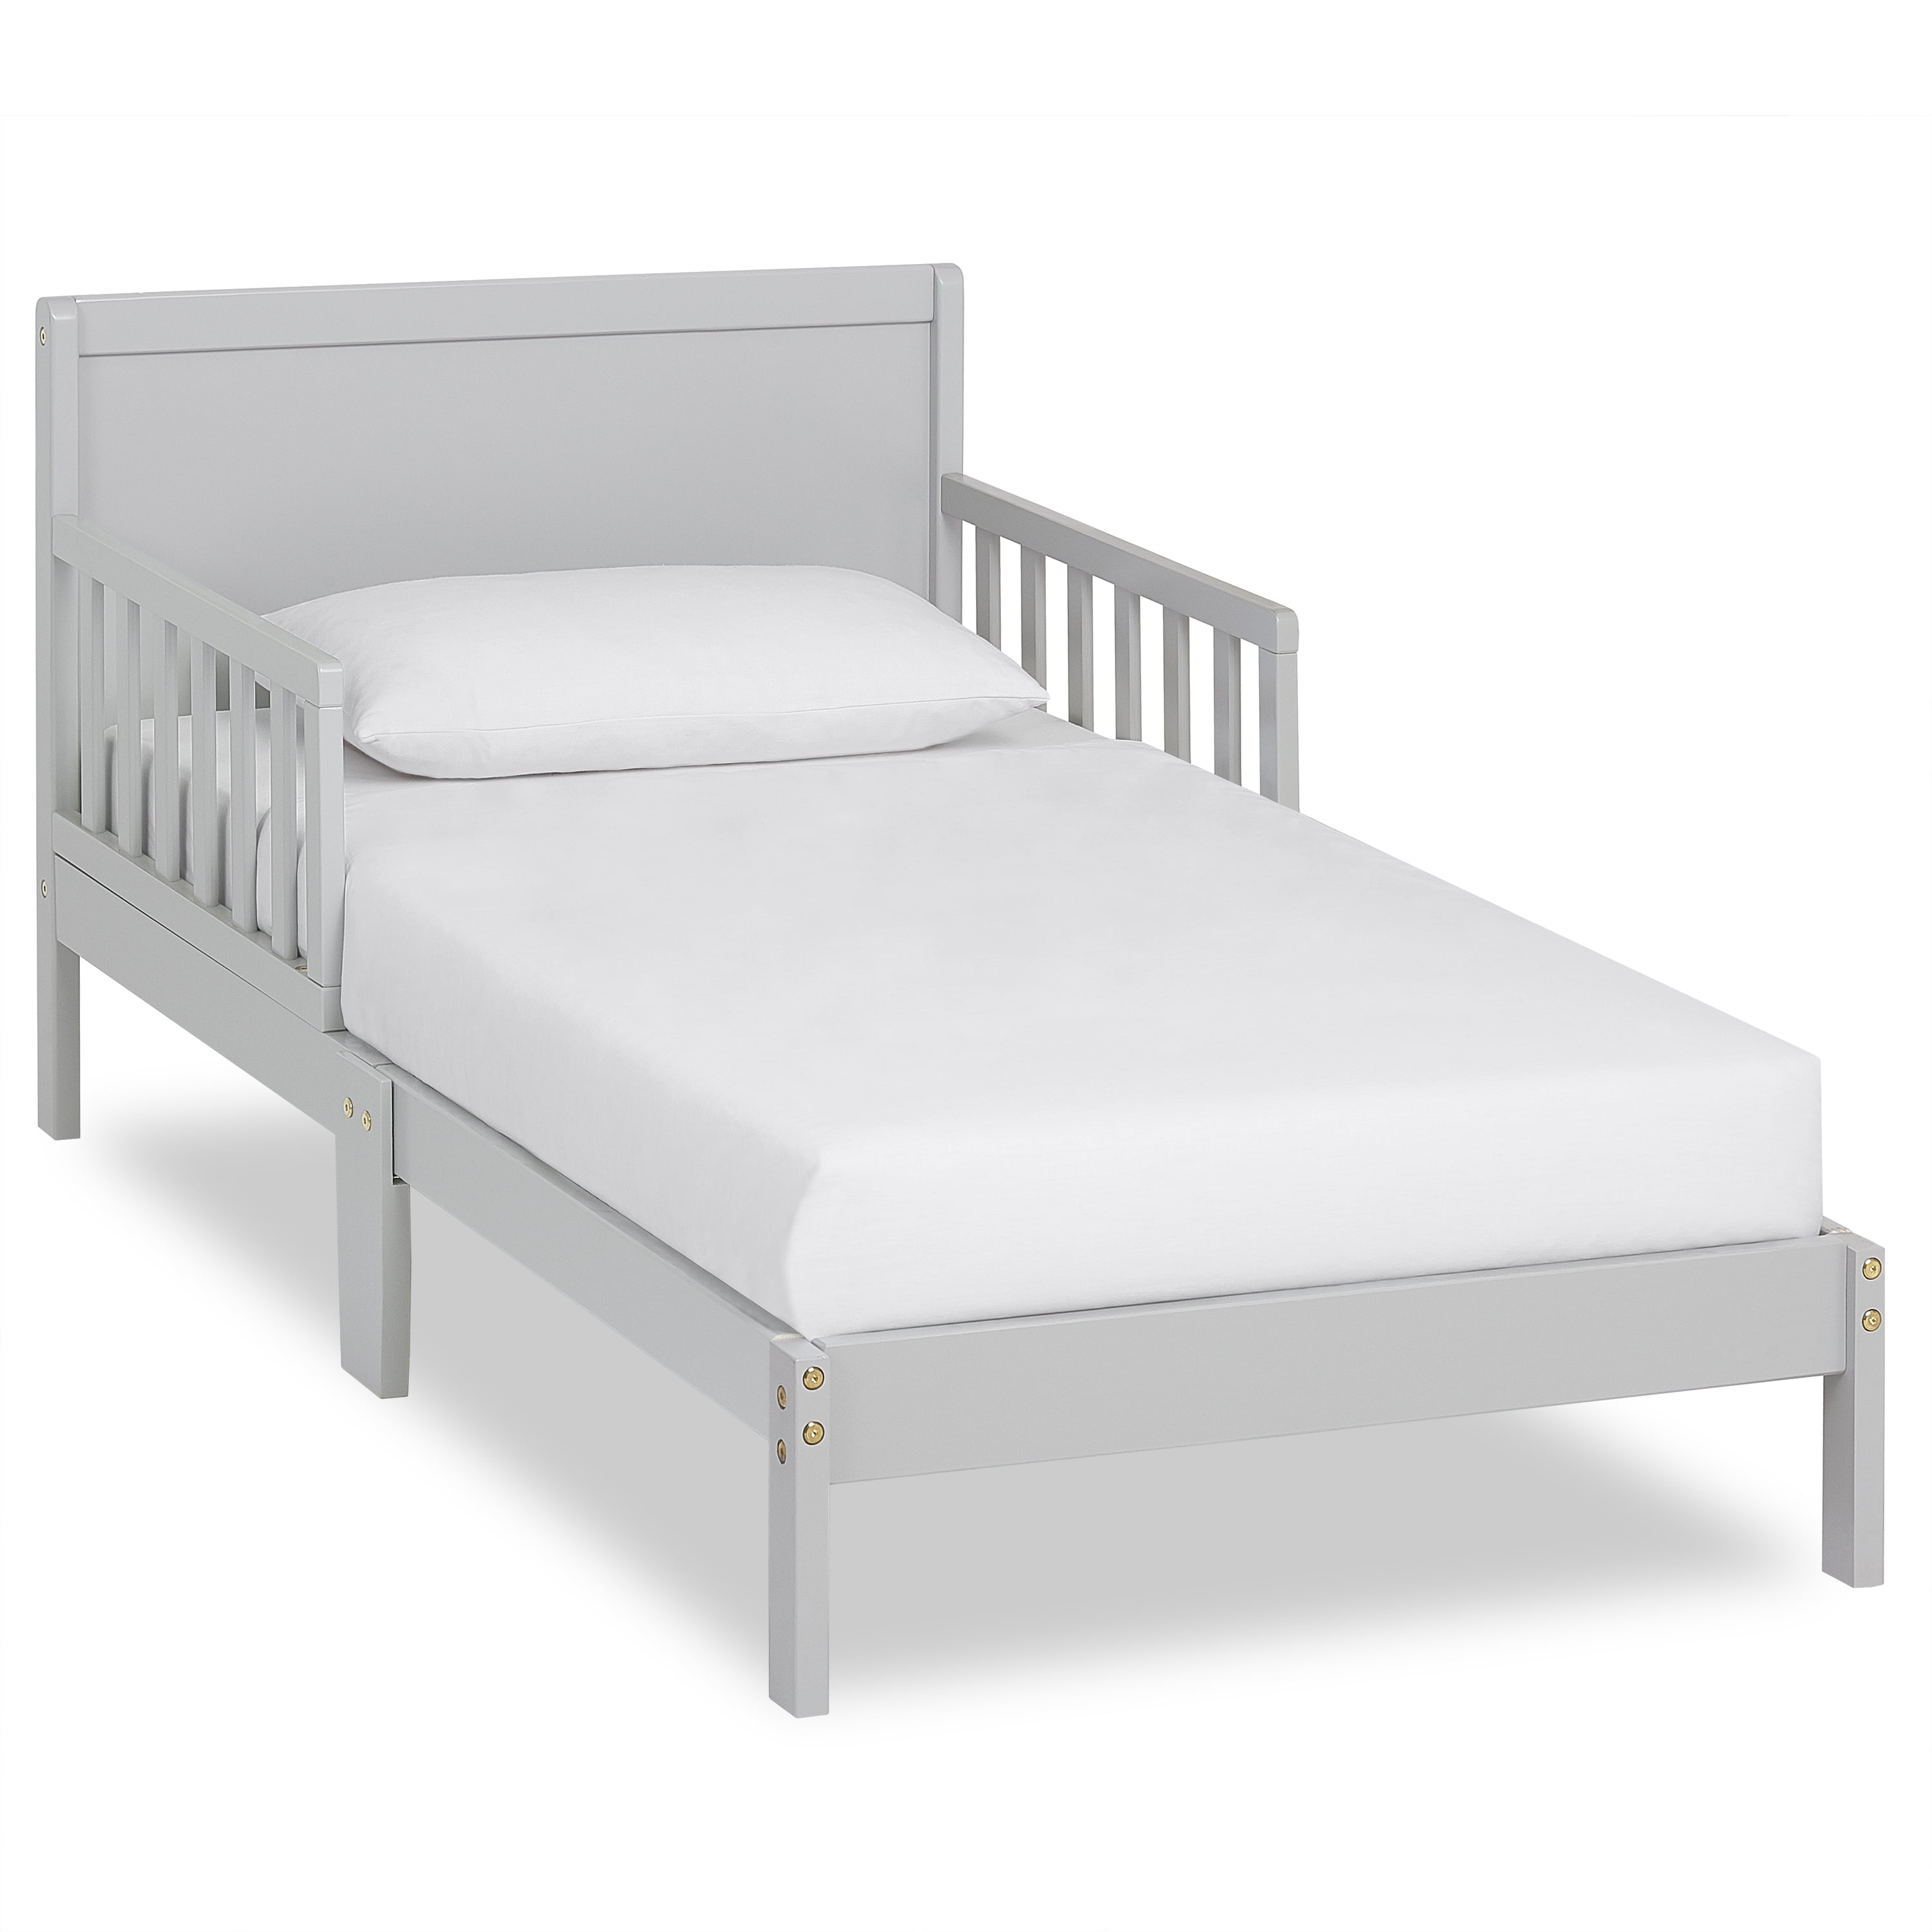 Photo 1 of Dream On Me Brookside Toddler Bed, Pebble Grey